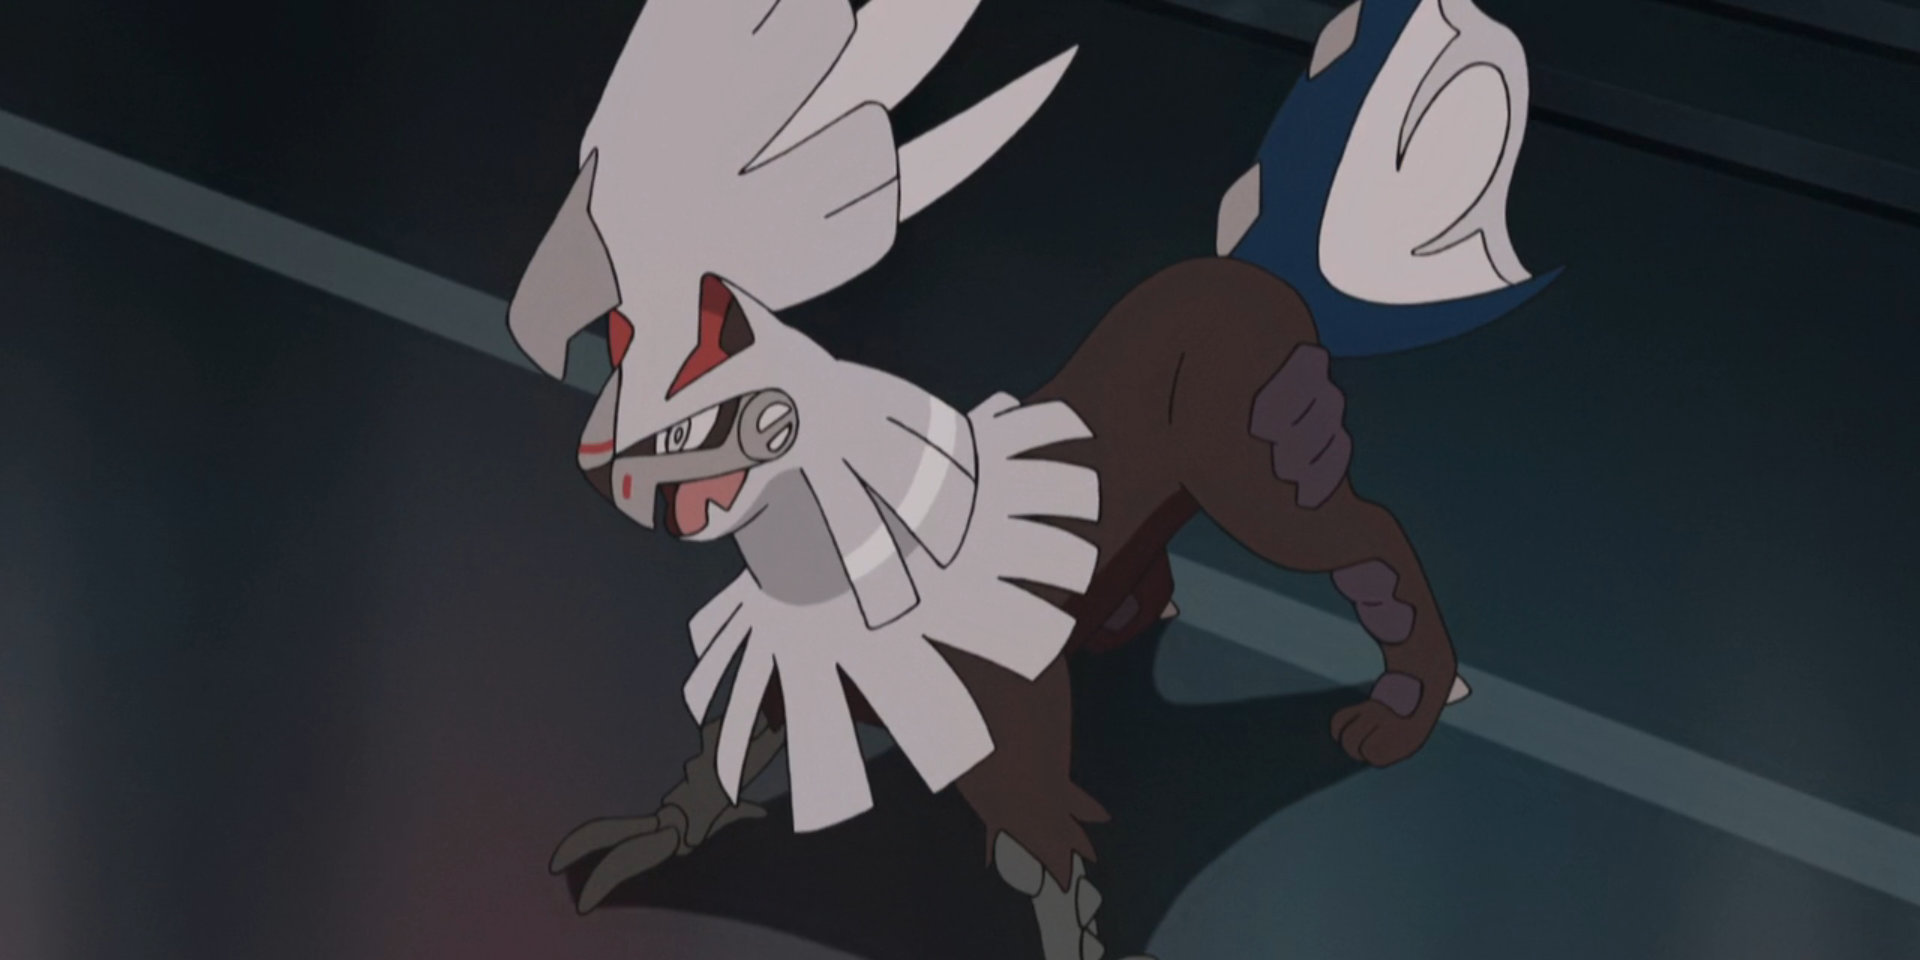 Silvally appears in a scene from the Pokemon anime.